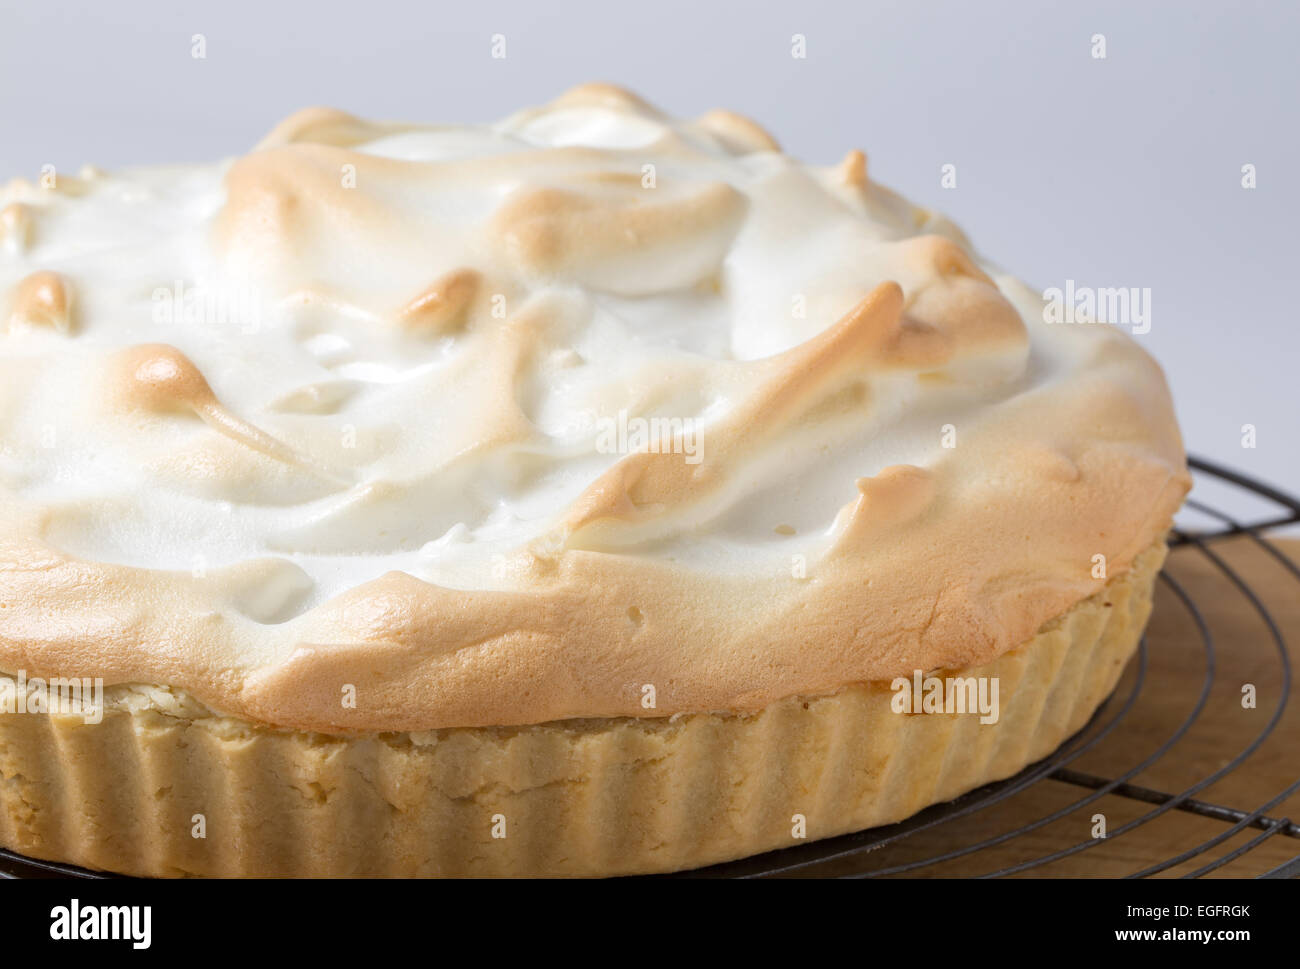 Homemade lemon meringue pie, a classic of European dessert cuisine, on a cooling rack fresh from the oven Stock Photo